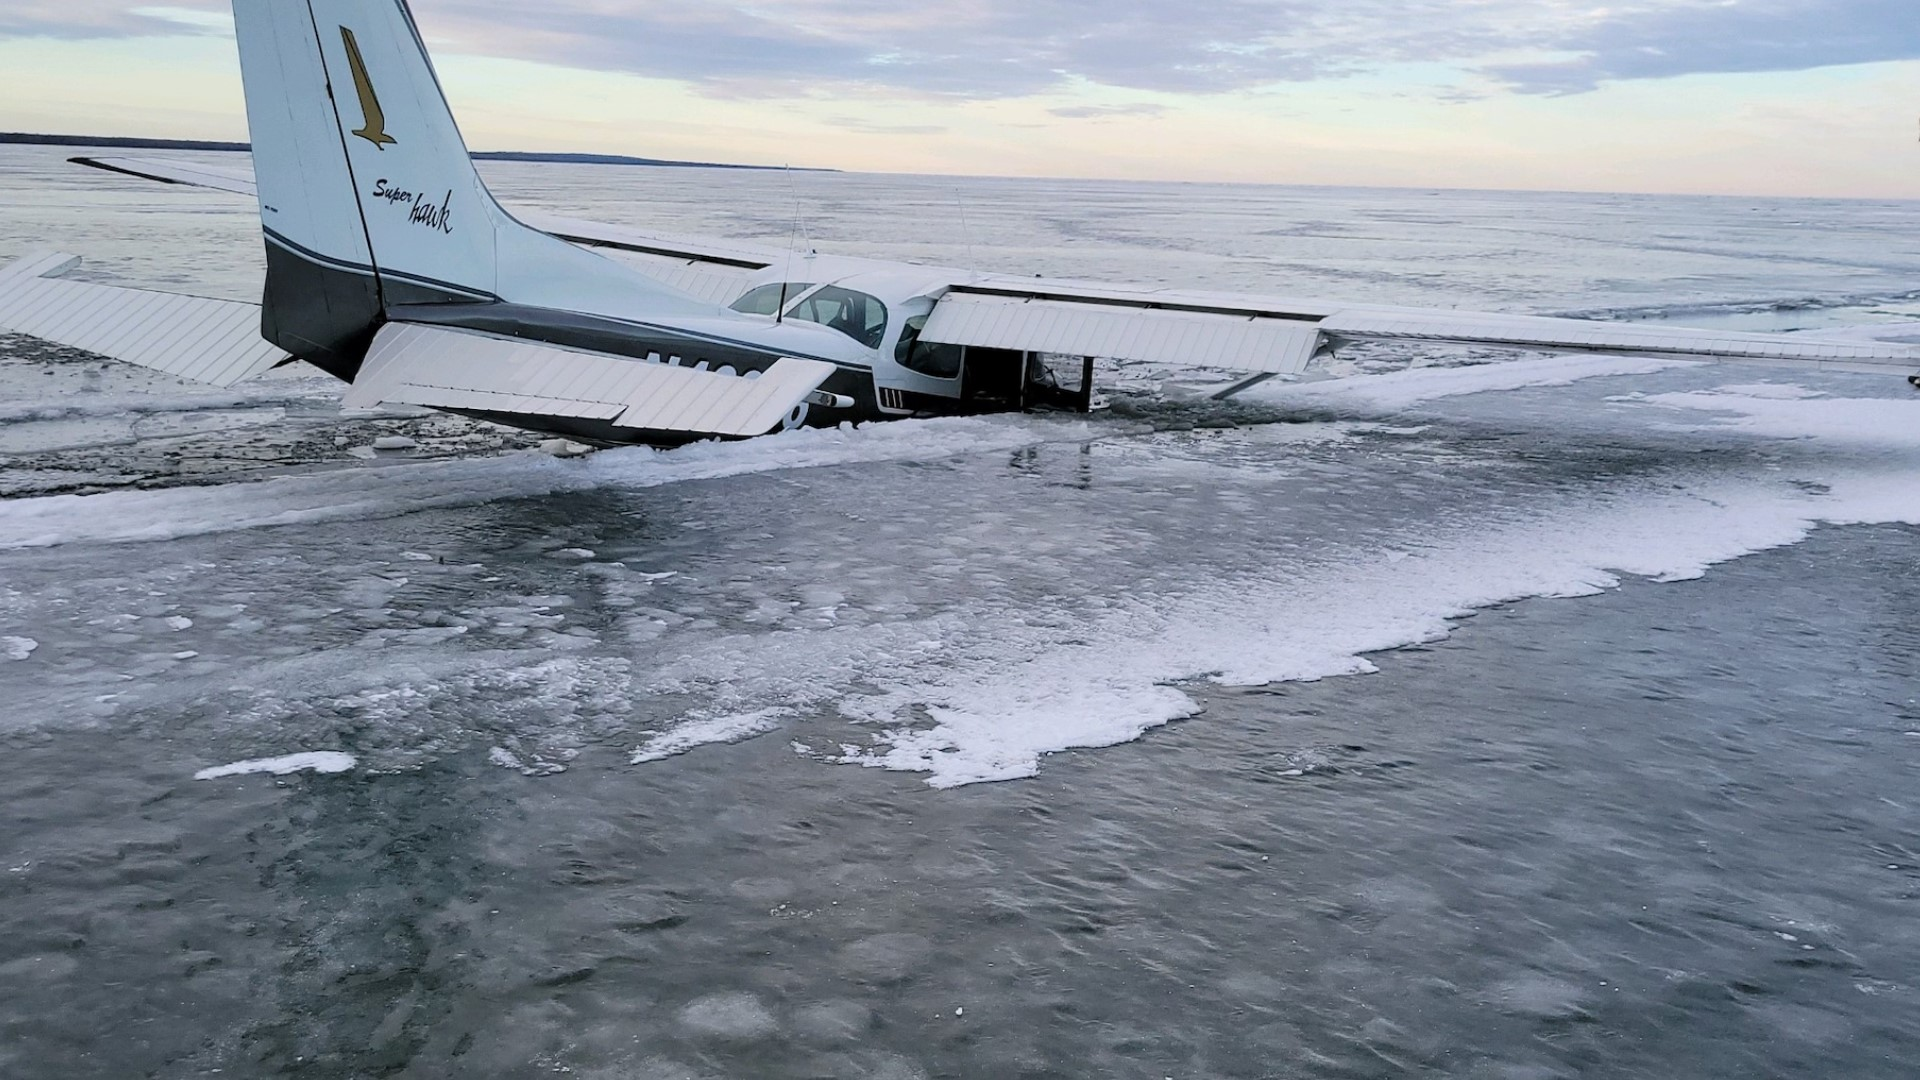 Plane breaks through thin ice on Minnesota ice fishing lake, 2 days after 35 anglers were rescued